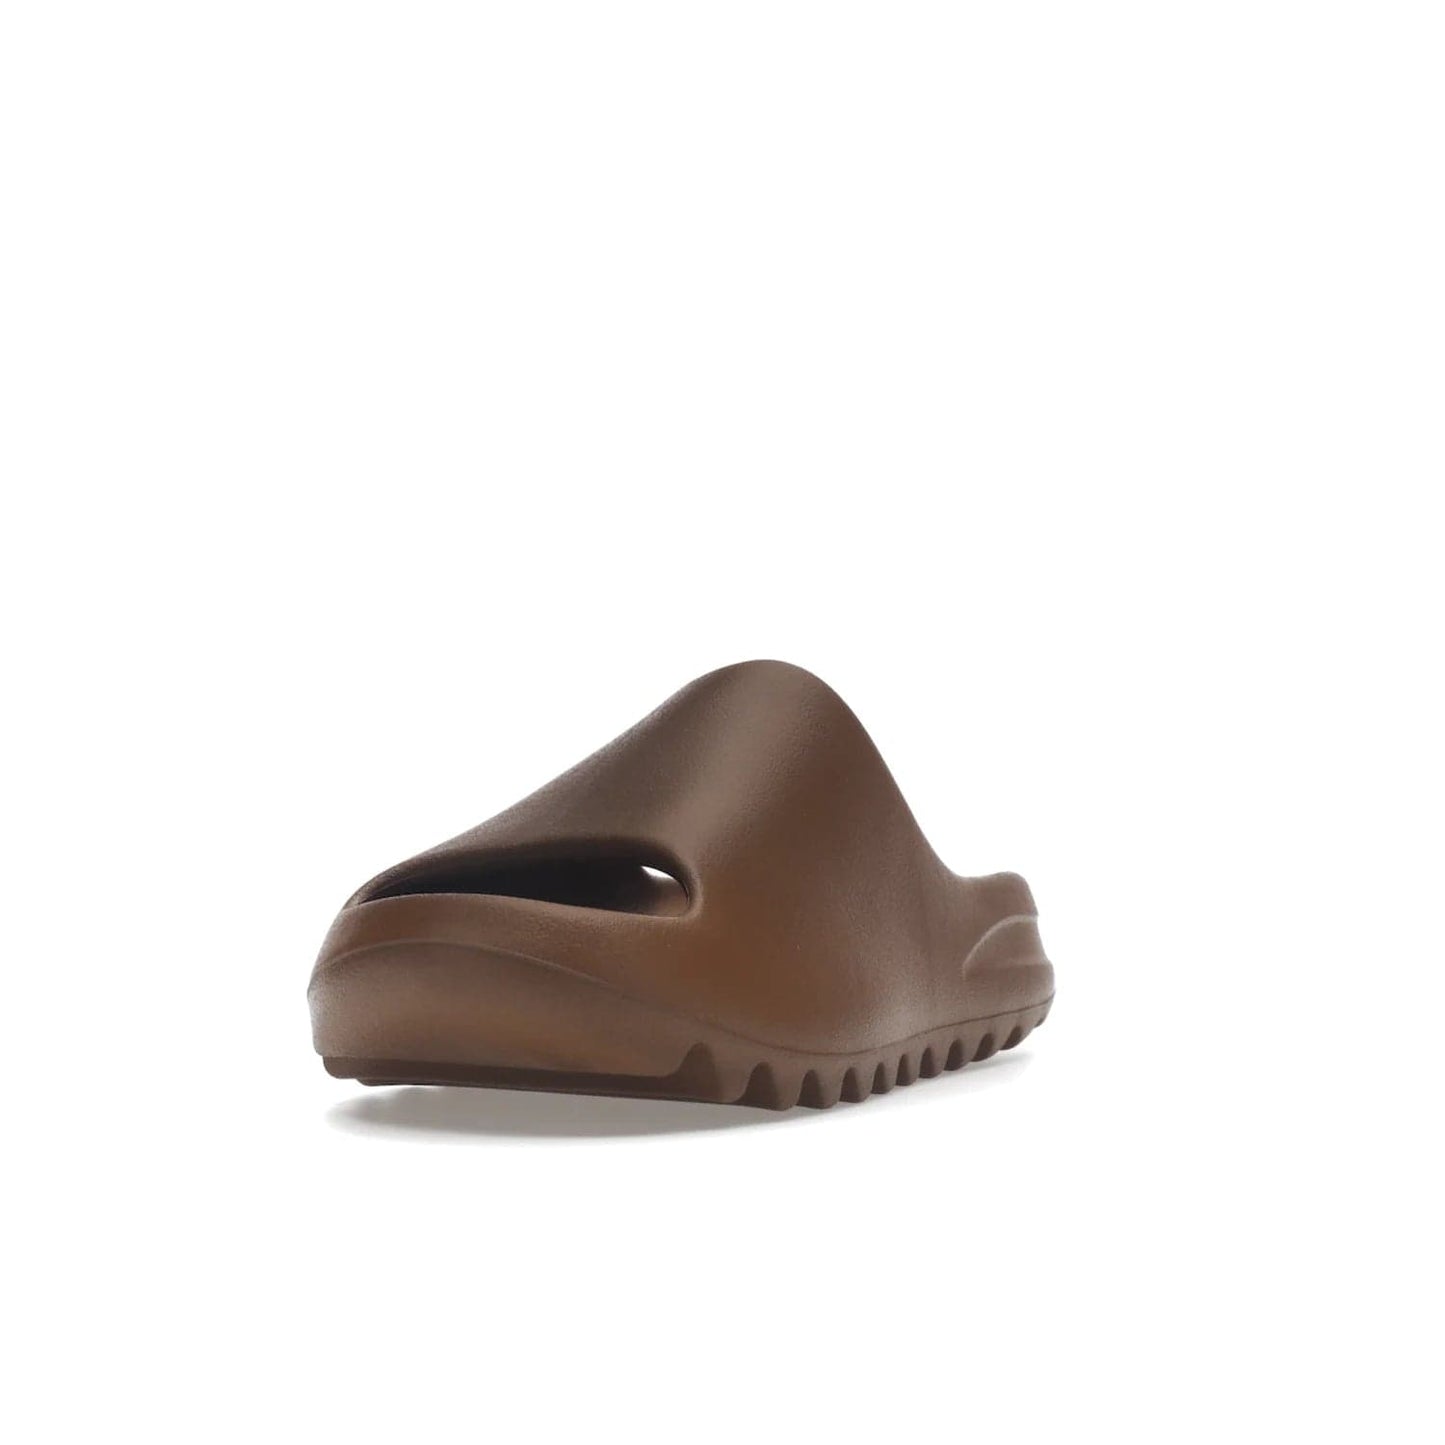 adidas Yeezy Slide Flax - Image 13 - Only at www.BallersClubKickz.com - Score the perfect casual look with the adidas Yeezy Slide Flax. Made with lightweight injected EVA plus horizontal grooves underfoot for traction. Release on August 22, 2022. $70.